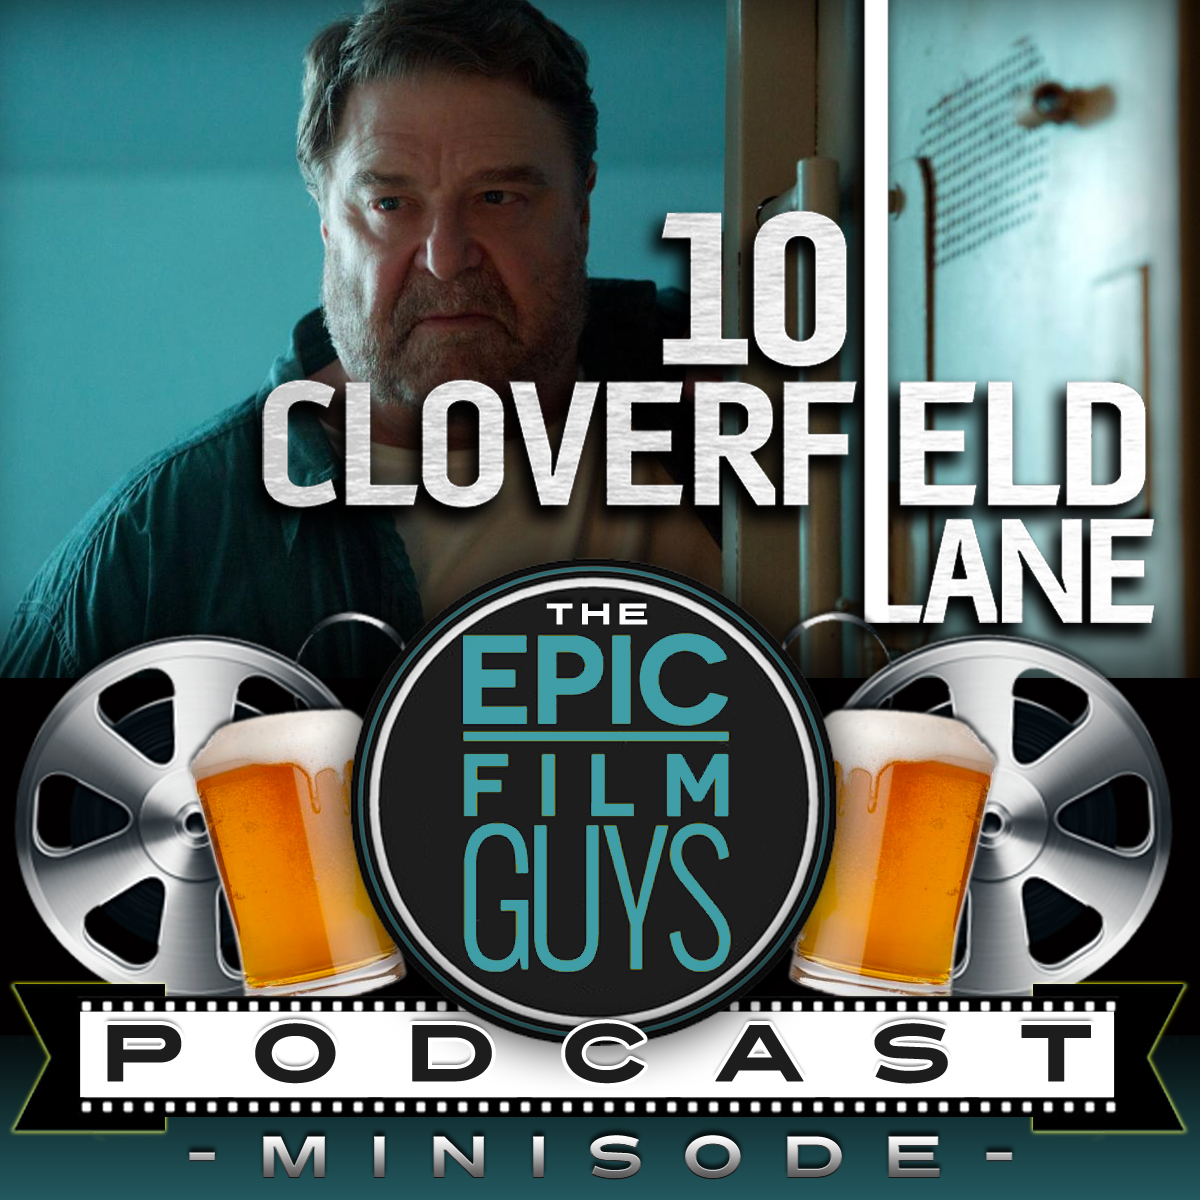 Minisode 002 - Our Review of 10 Cloverfield Lane!